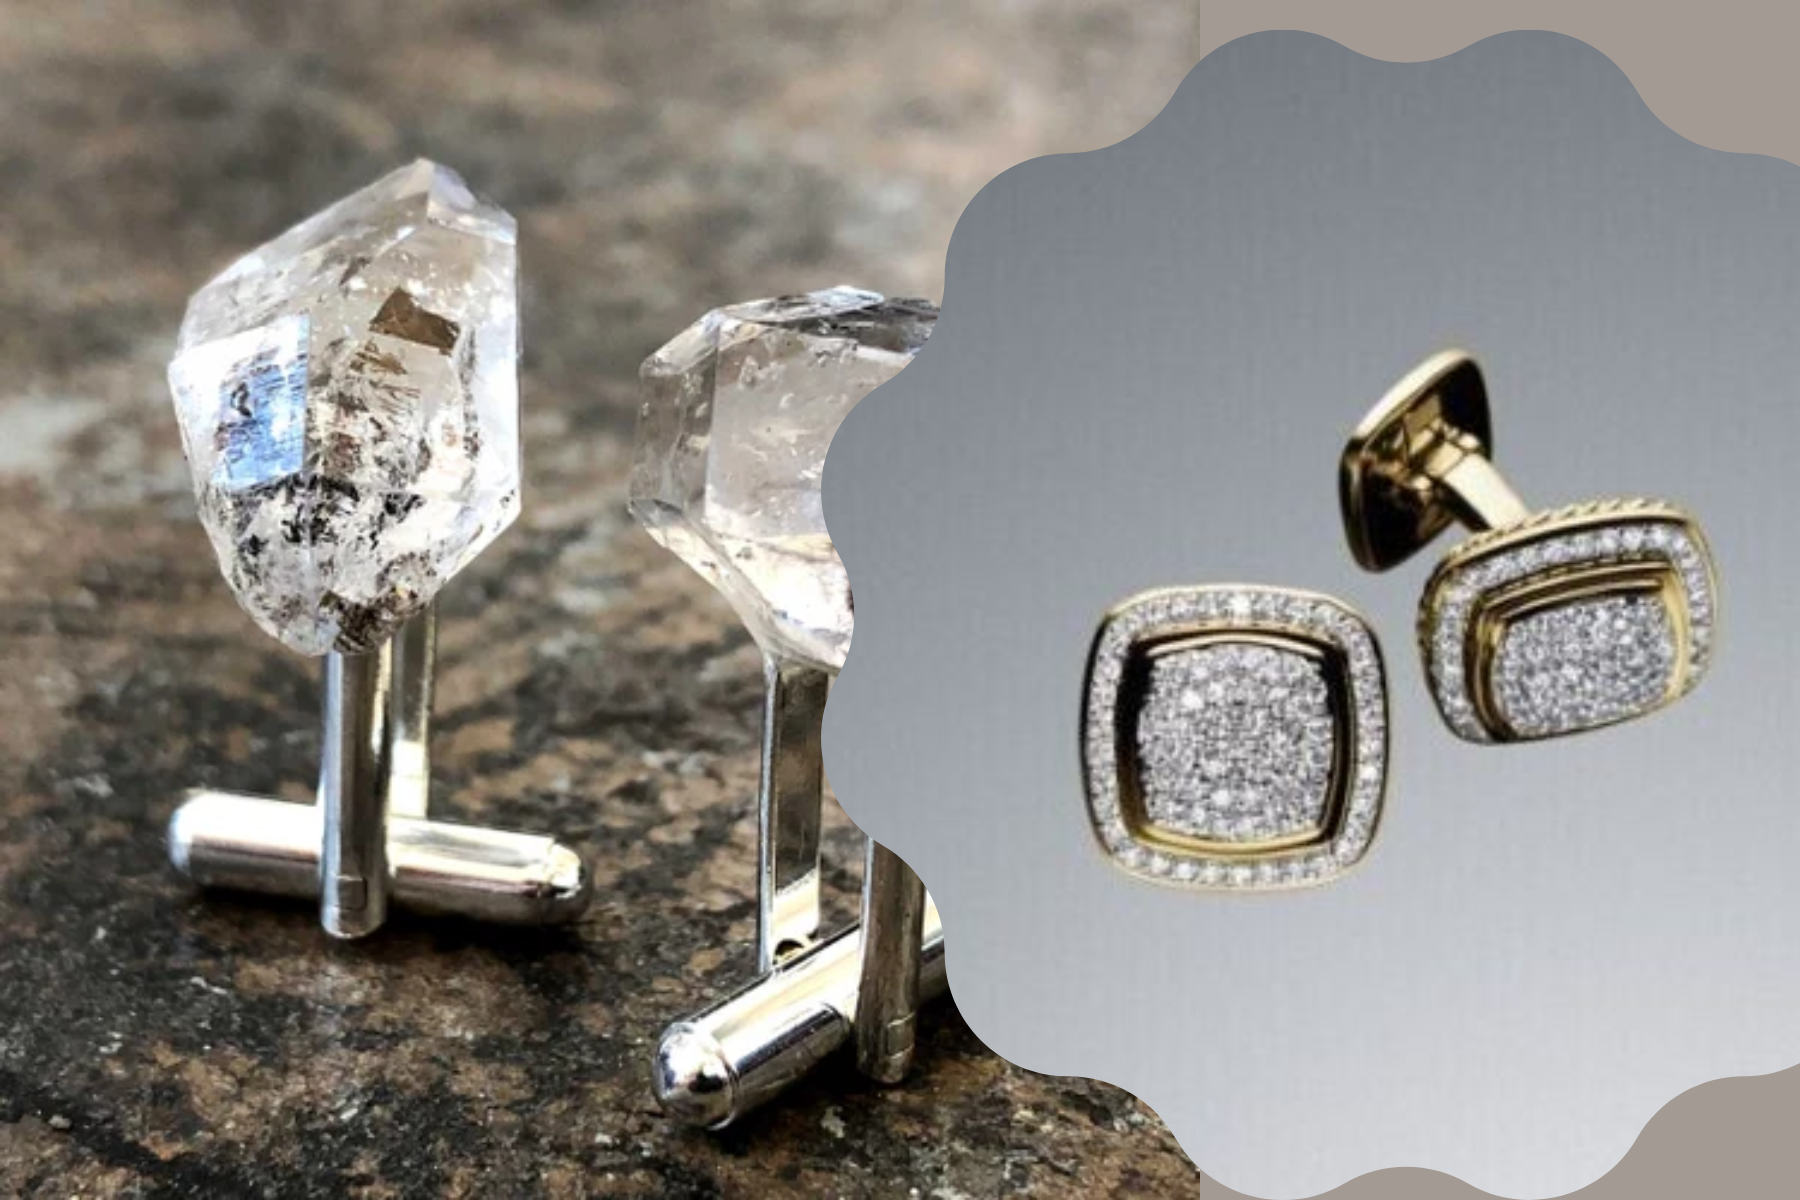 Two diamond cufflinks stand next to a pair of gold and diamond cufflinks on a floor